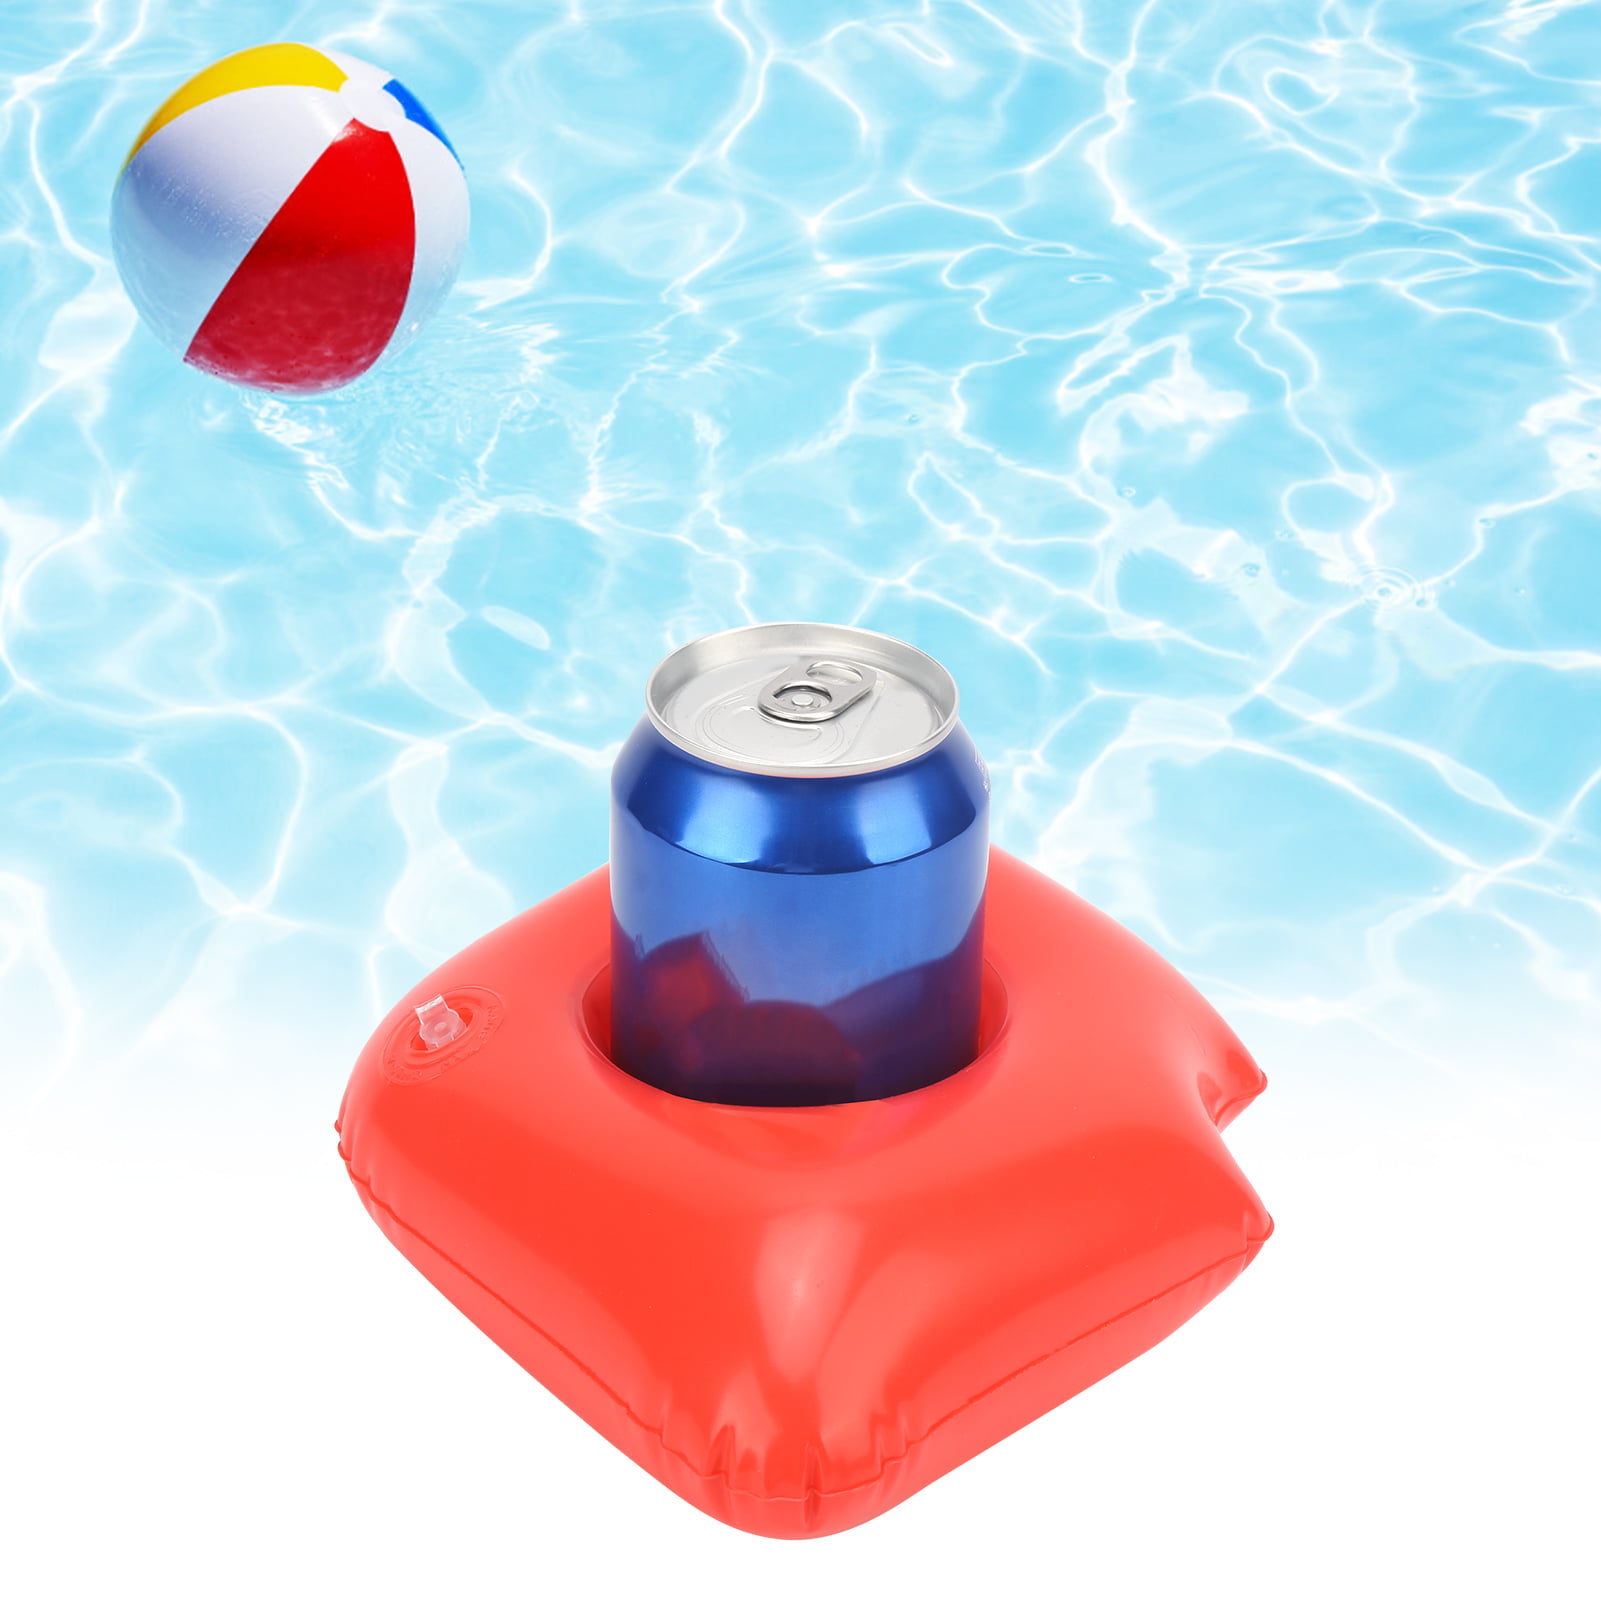 10x Inflatable Floating Drink Can Cup Holder Hot Tub Swimming Pool Party Supply 